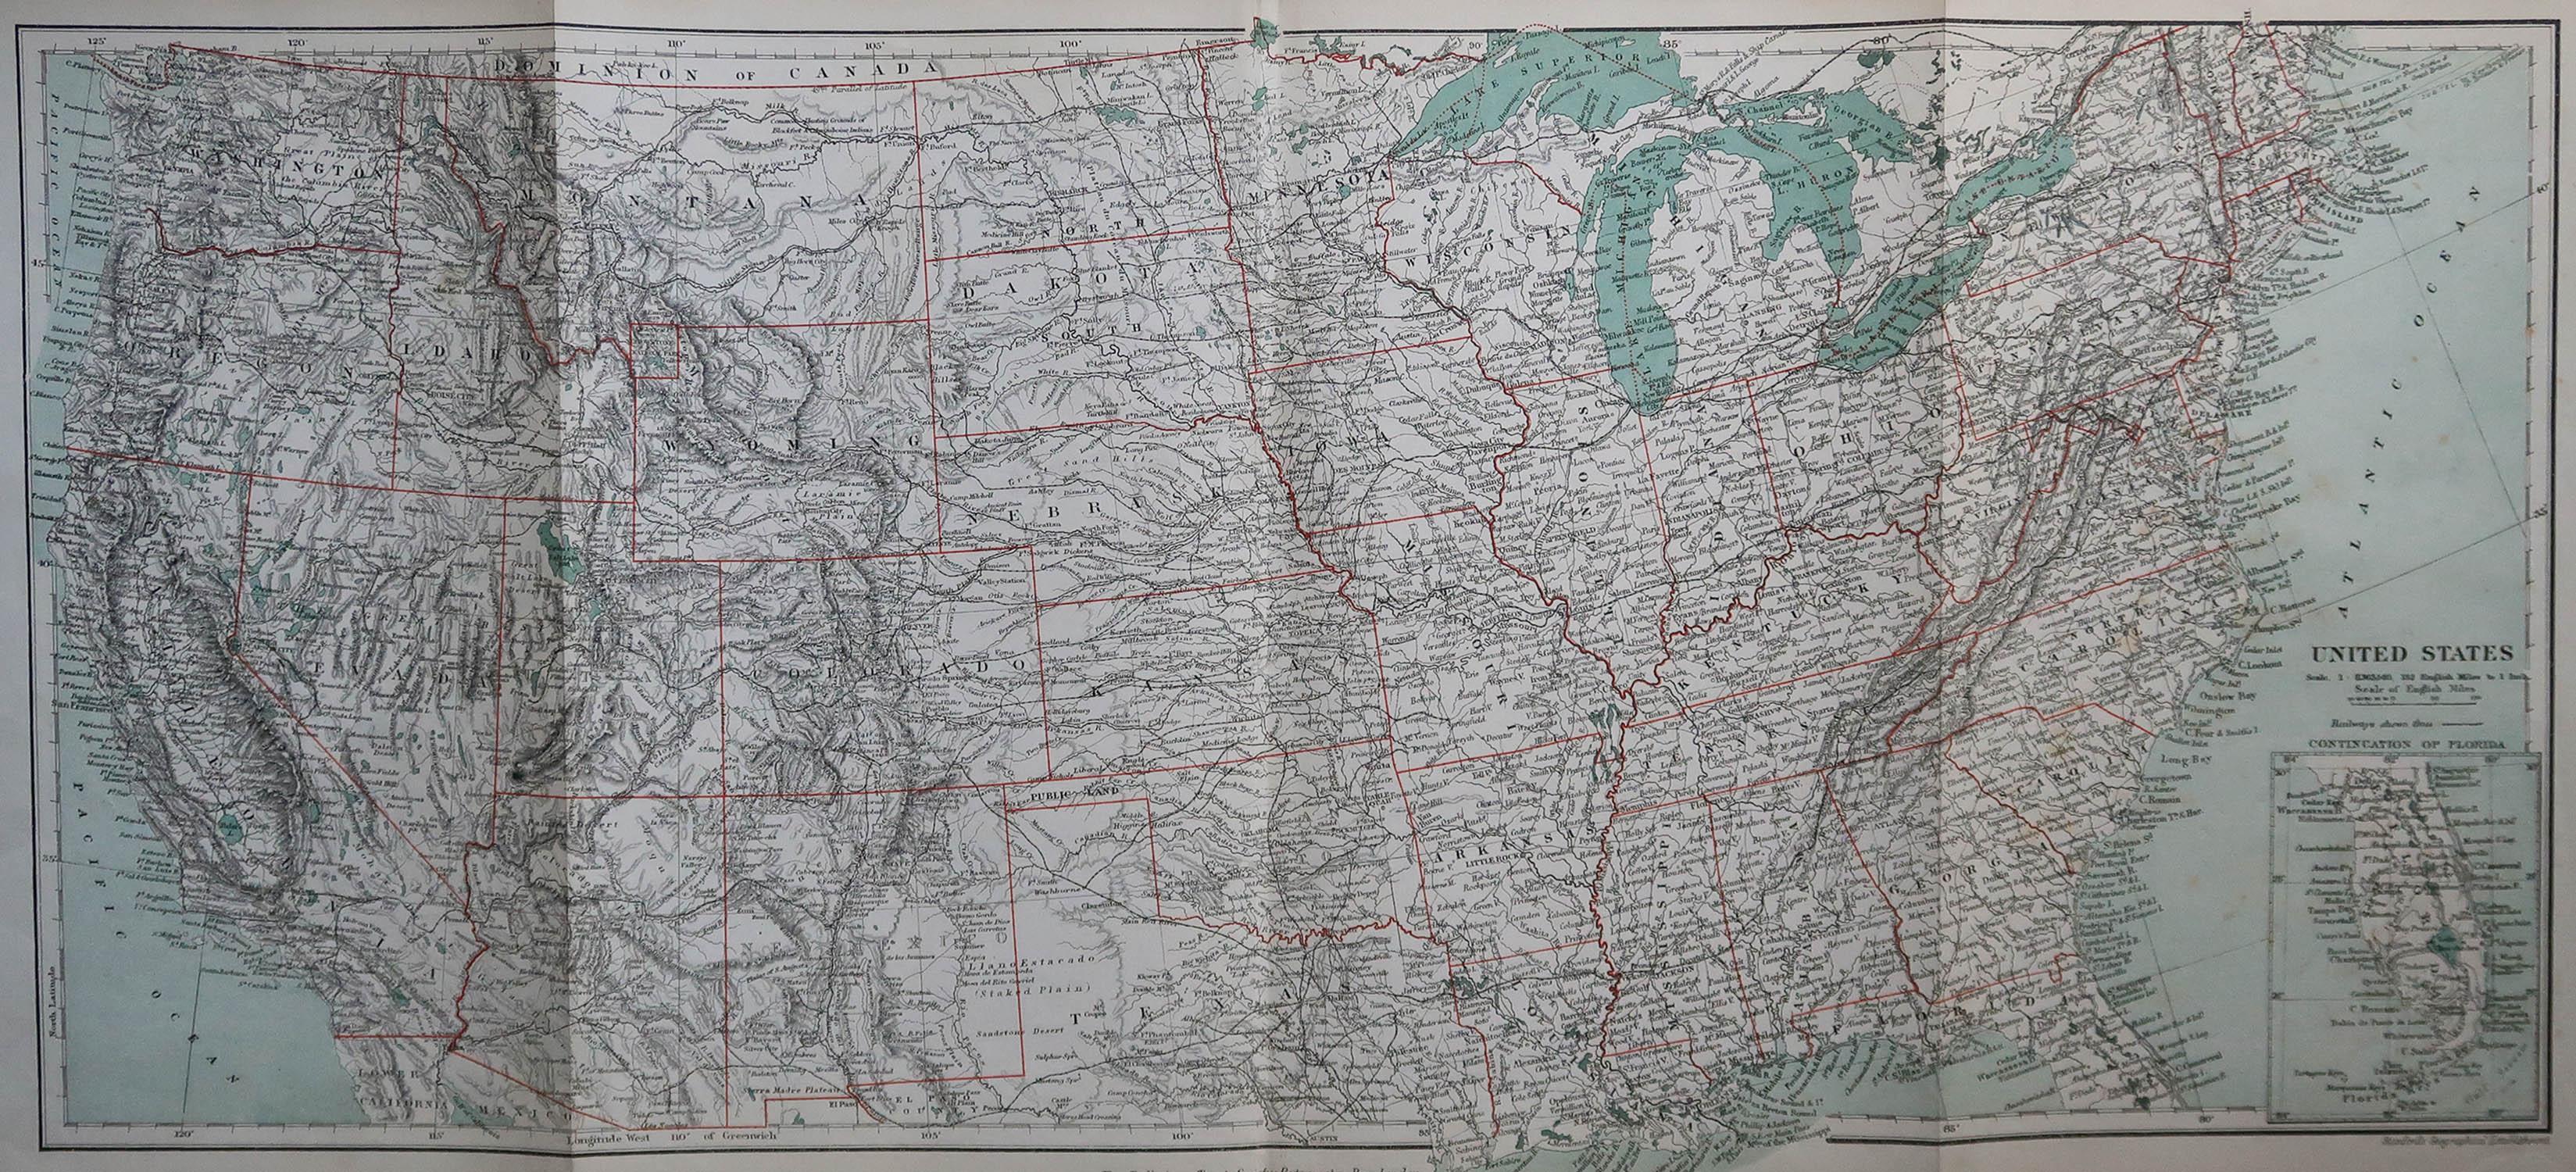 Great map of the USA

By The Stanford's Geographical Establishment

Original colour

Unframed.








